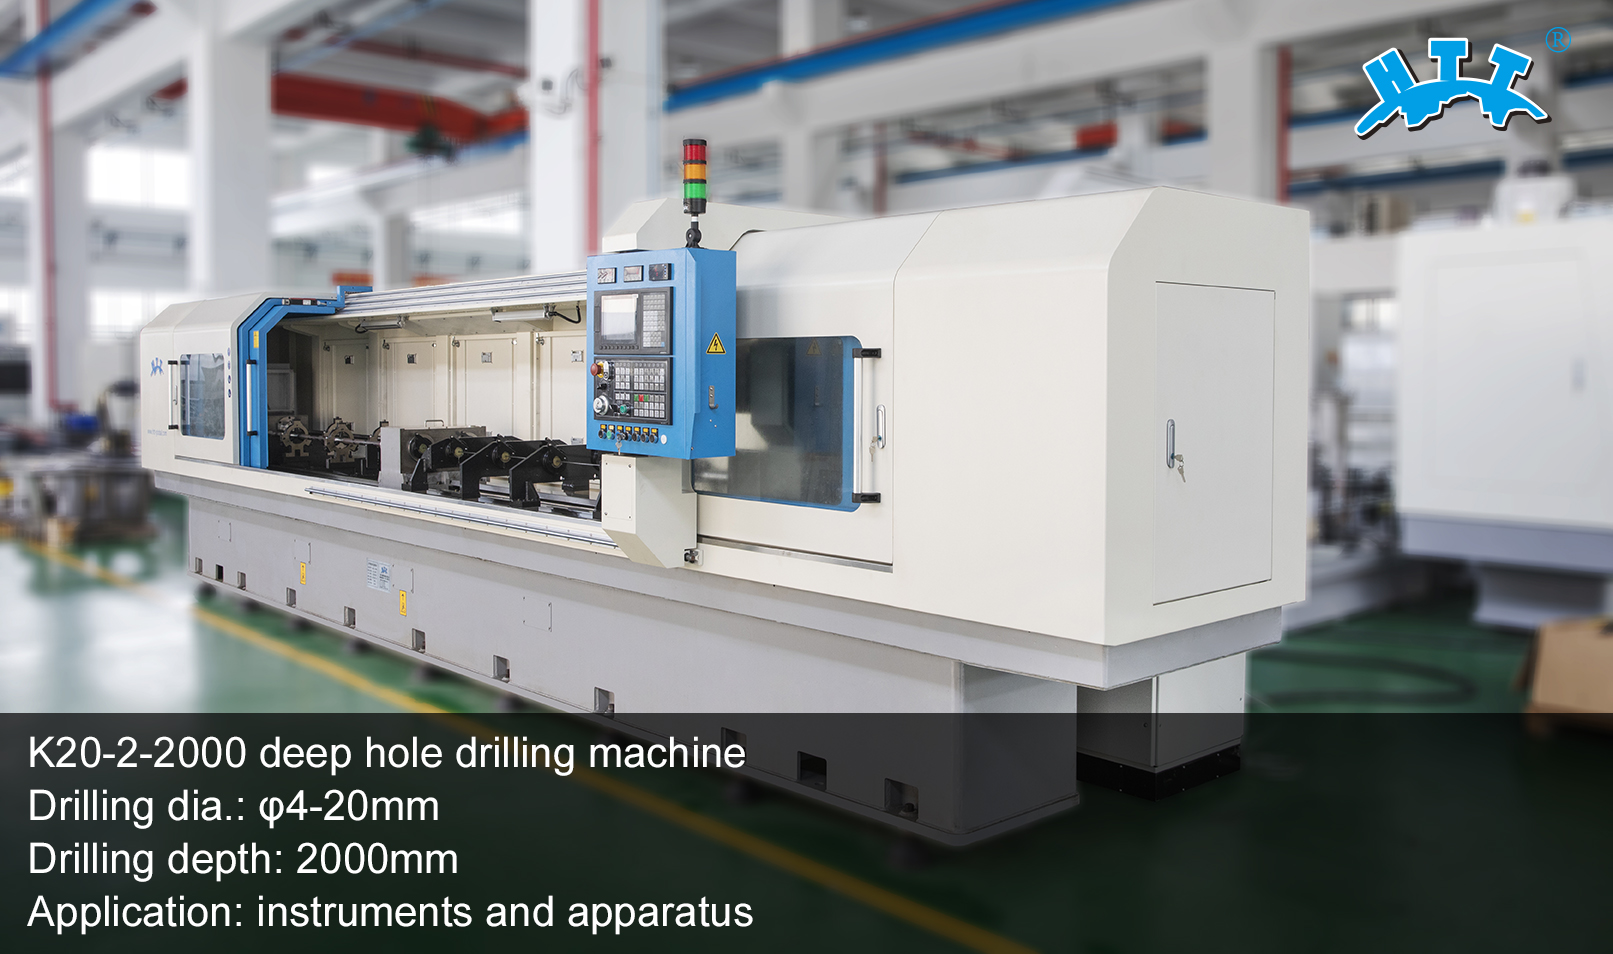 HTT's deep hole drilling machine for shafts can drill small holes.